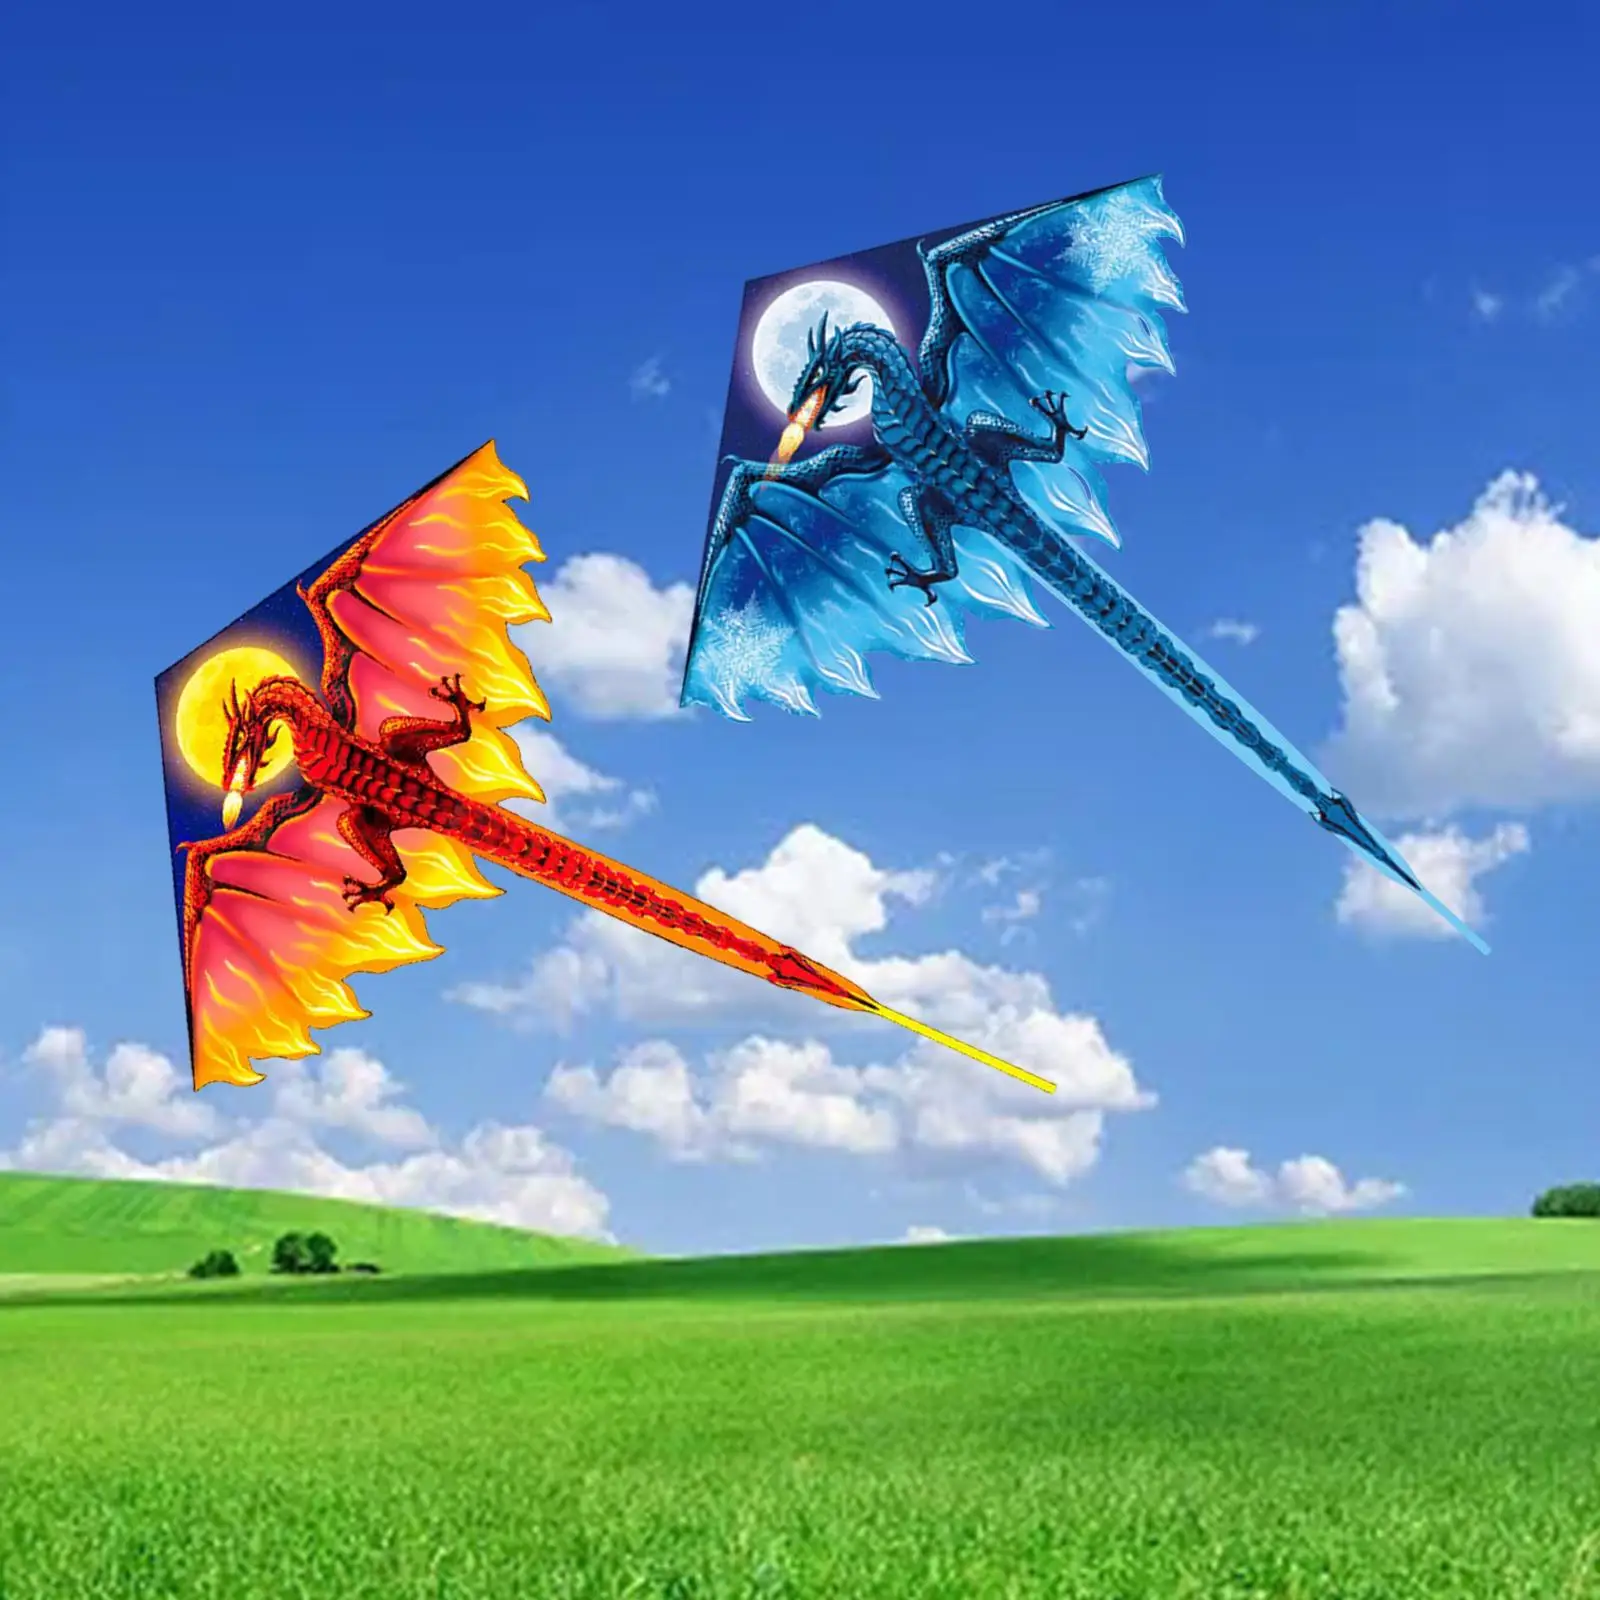 Large Spring Kite Easy to Fly Funny Colorful 3D dragon Animal for Family Game Windy Day outdoor Beach